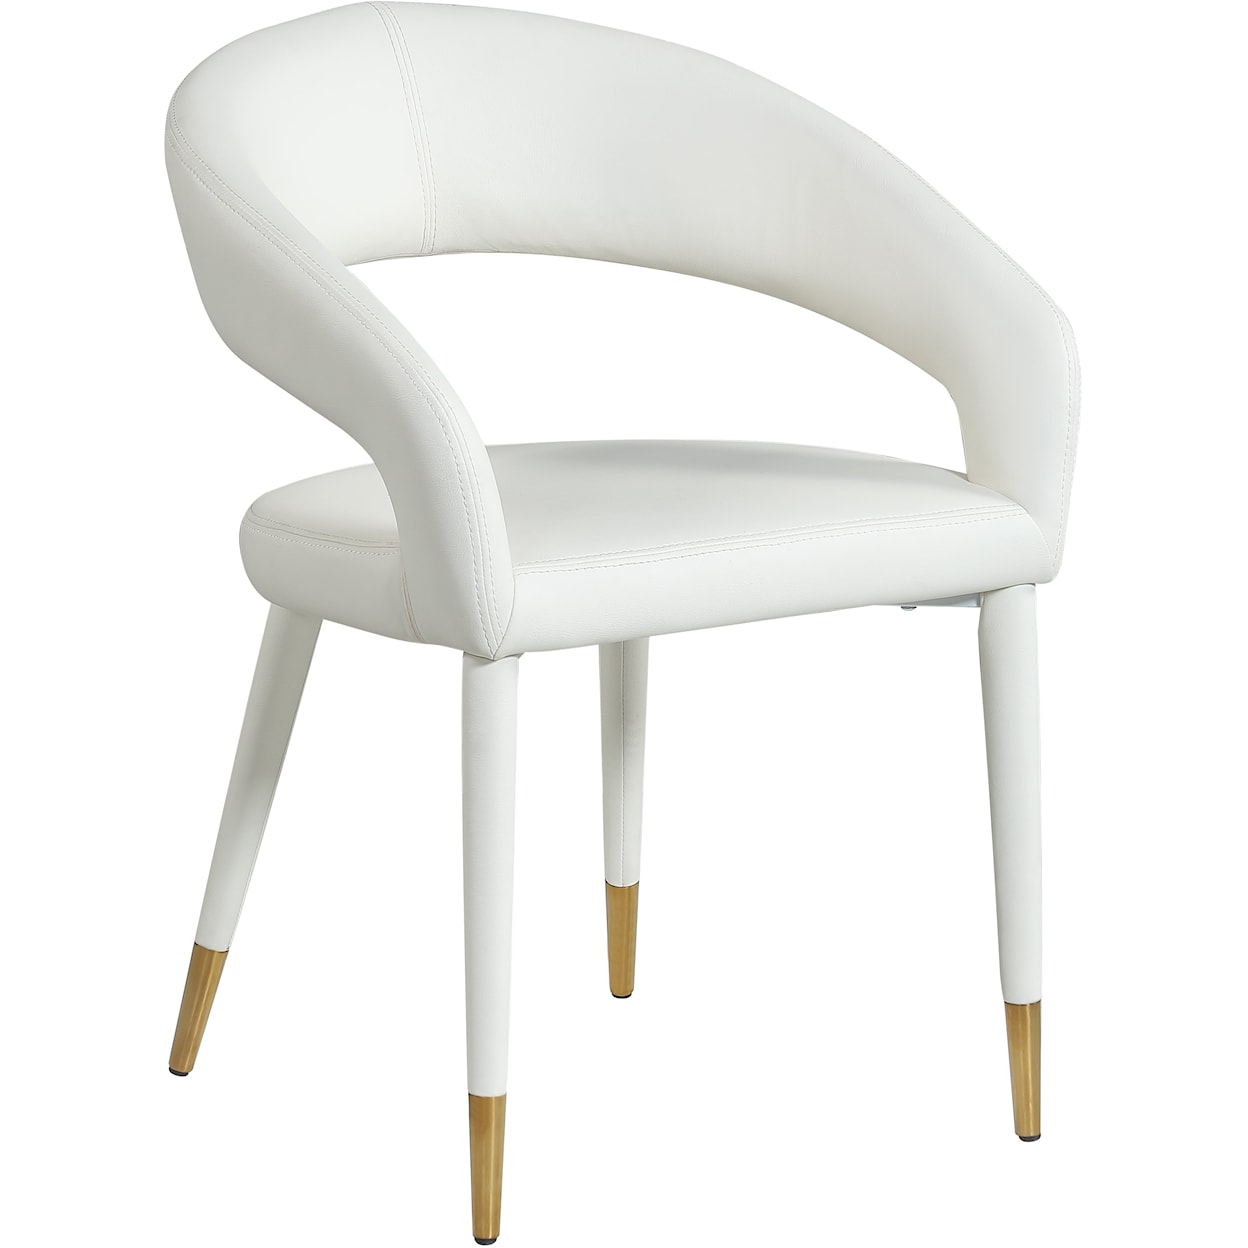 Meridian Furniture Destiny Upholstered Faux Cream Leather Dining Chair